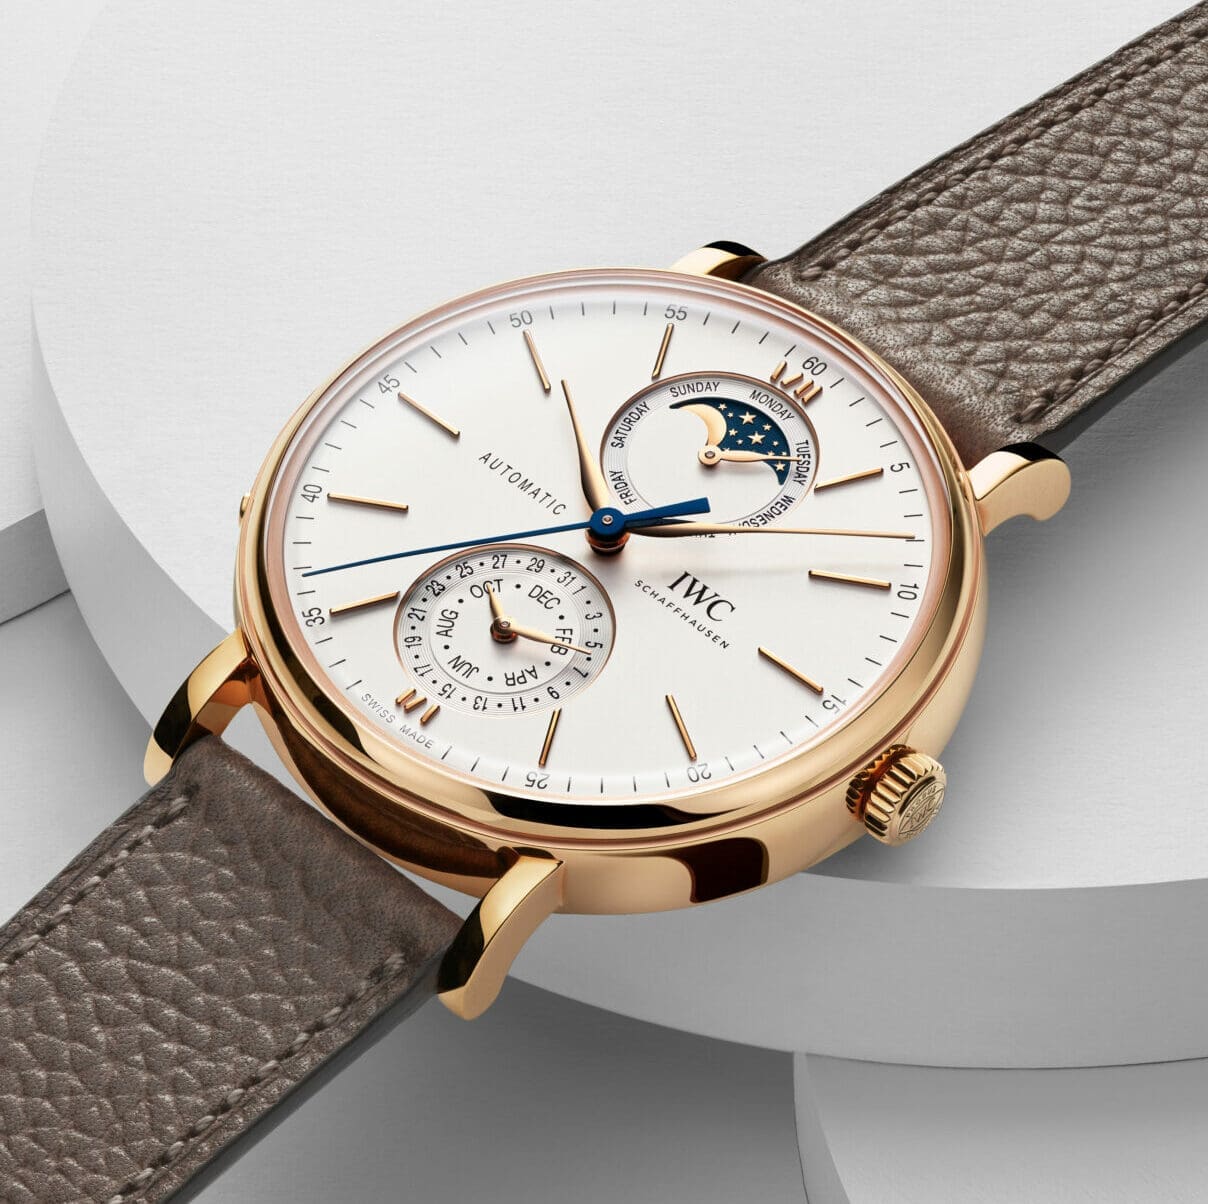 The IWC Portofino Complete Calendar features an exciting brand first